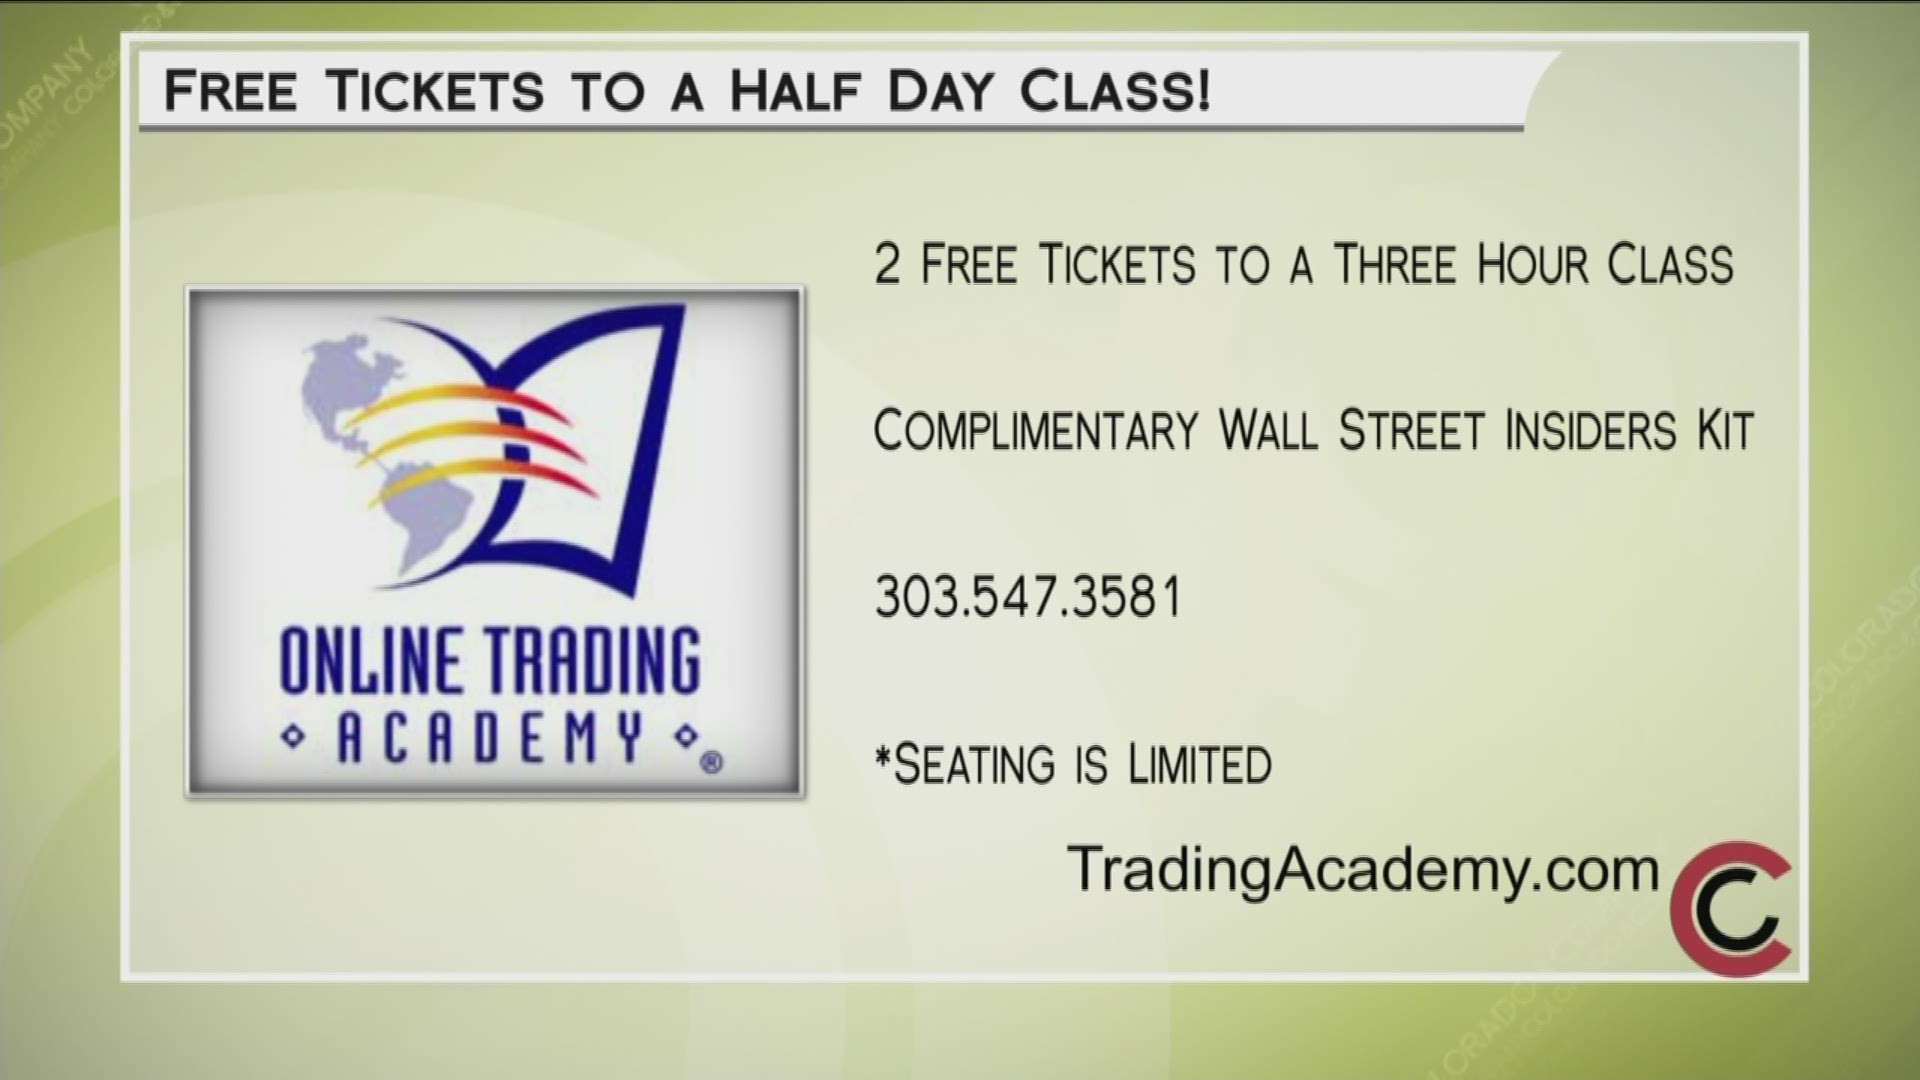 Trade and invest like the pros with Online Trading Academy. Get two free tickets to a half-day class by calling 303.547.3581 or visit www.TradingAcademy.com.